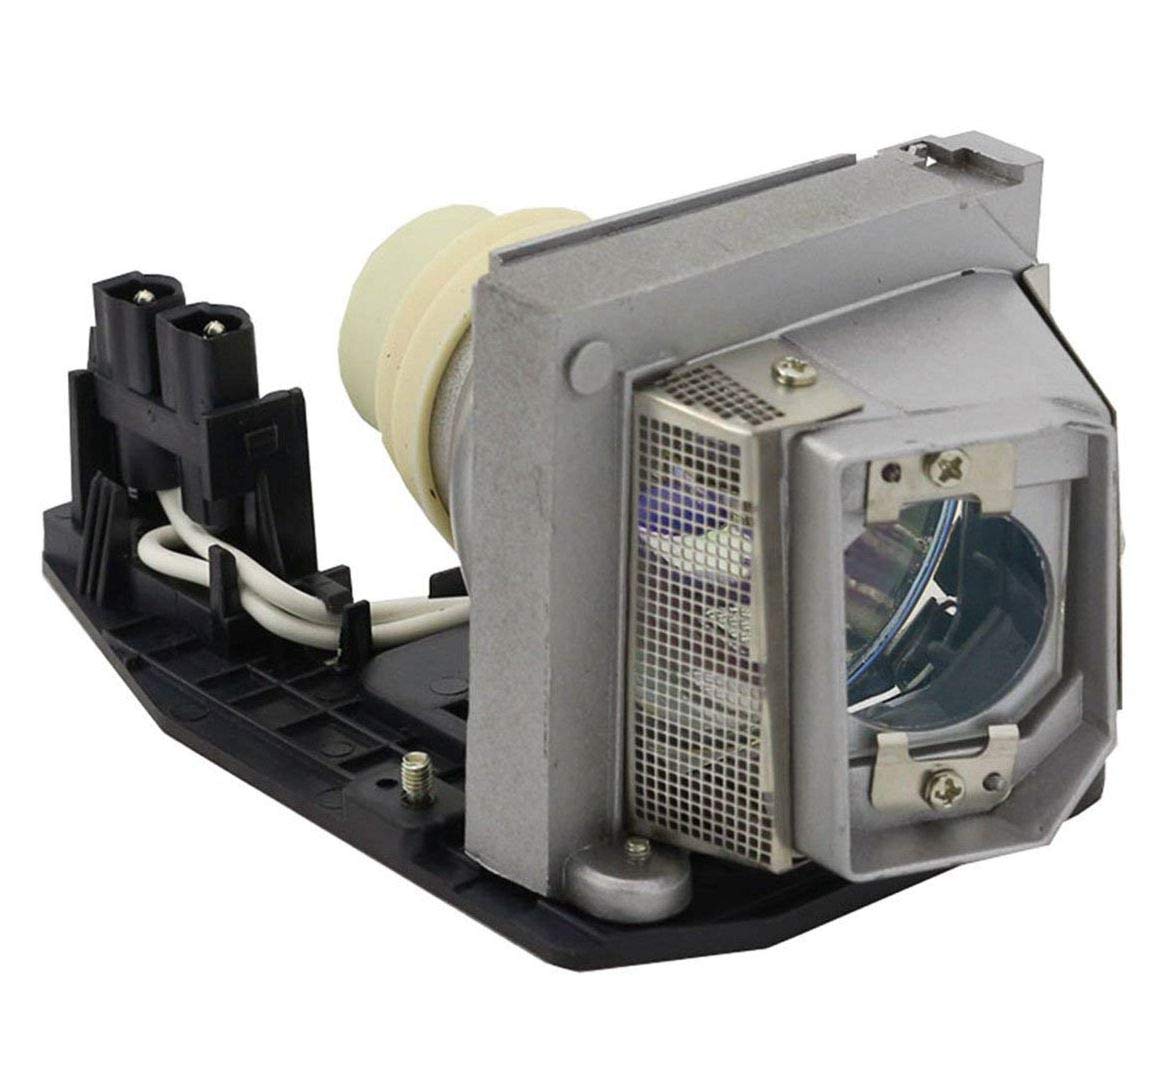 330-6581 / 725-10229 / GL464 Replacement Projector Lamp Module for DELL 1510X / 1610X / 1610HD Projectors: 330-6581-CBH